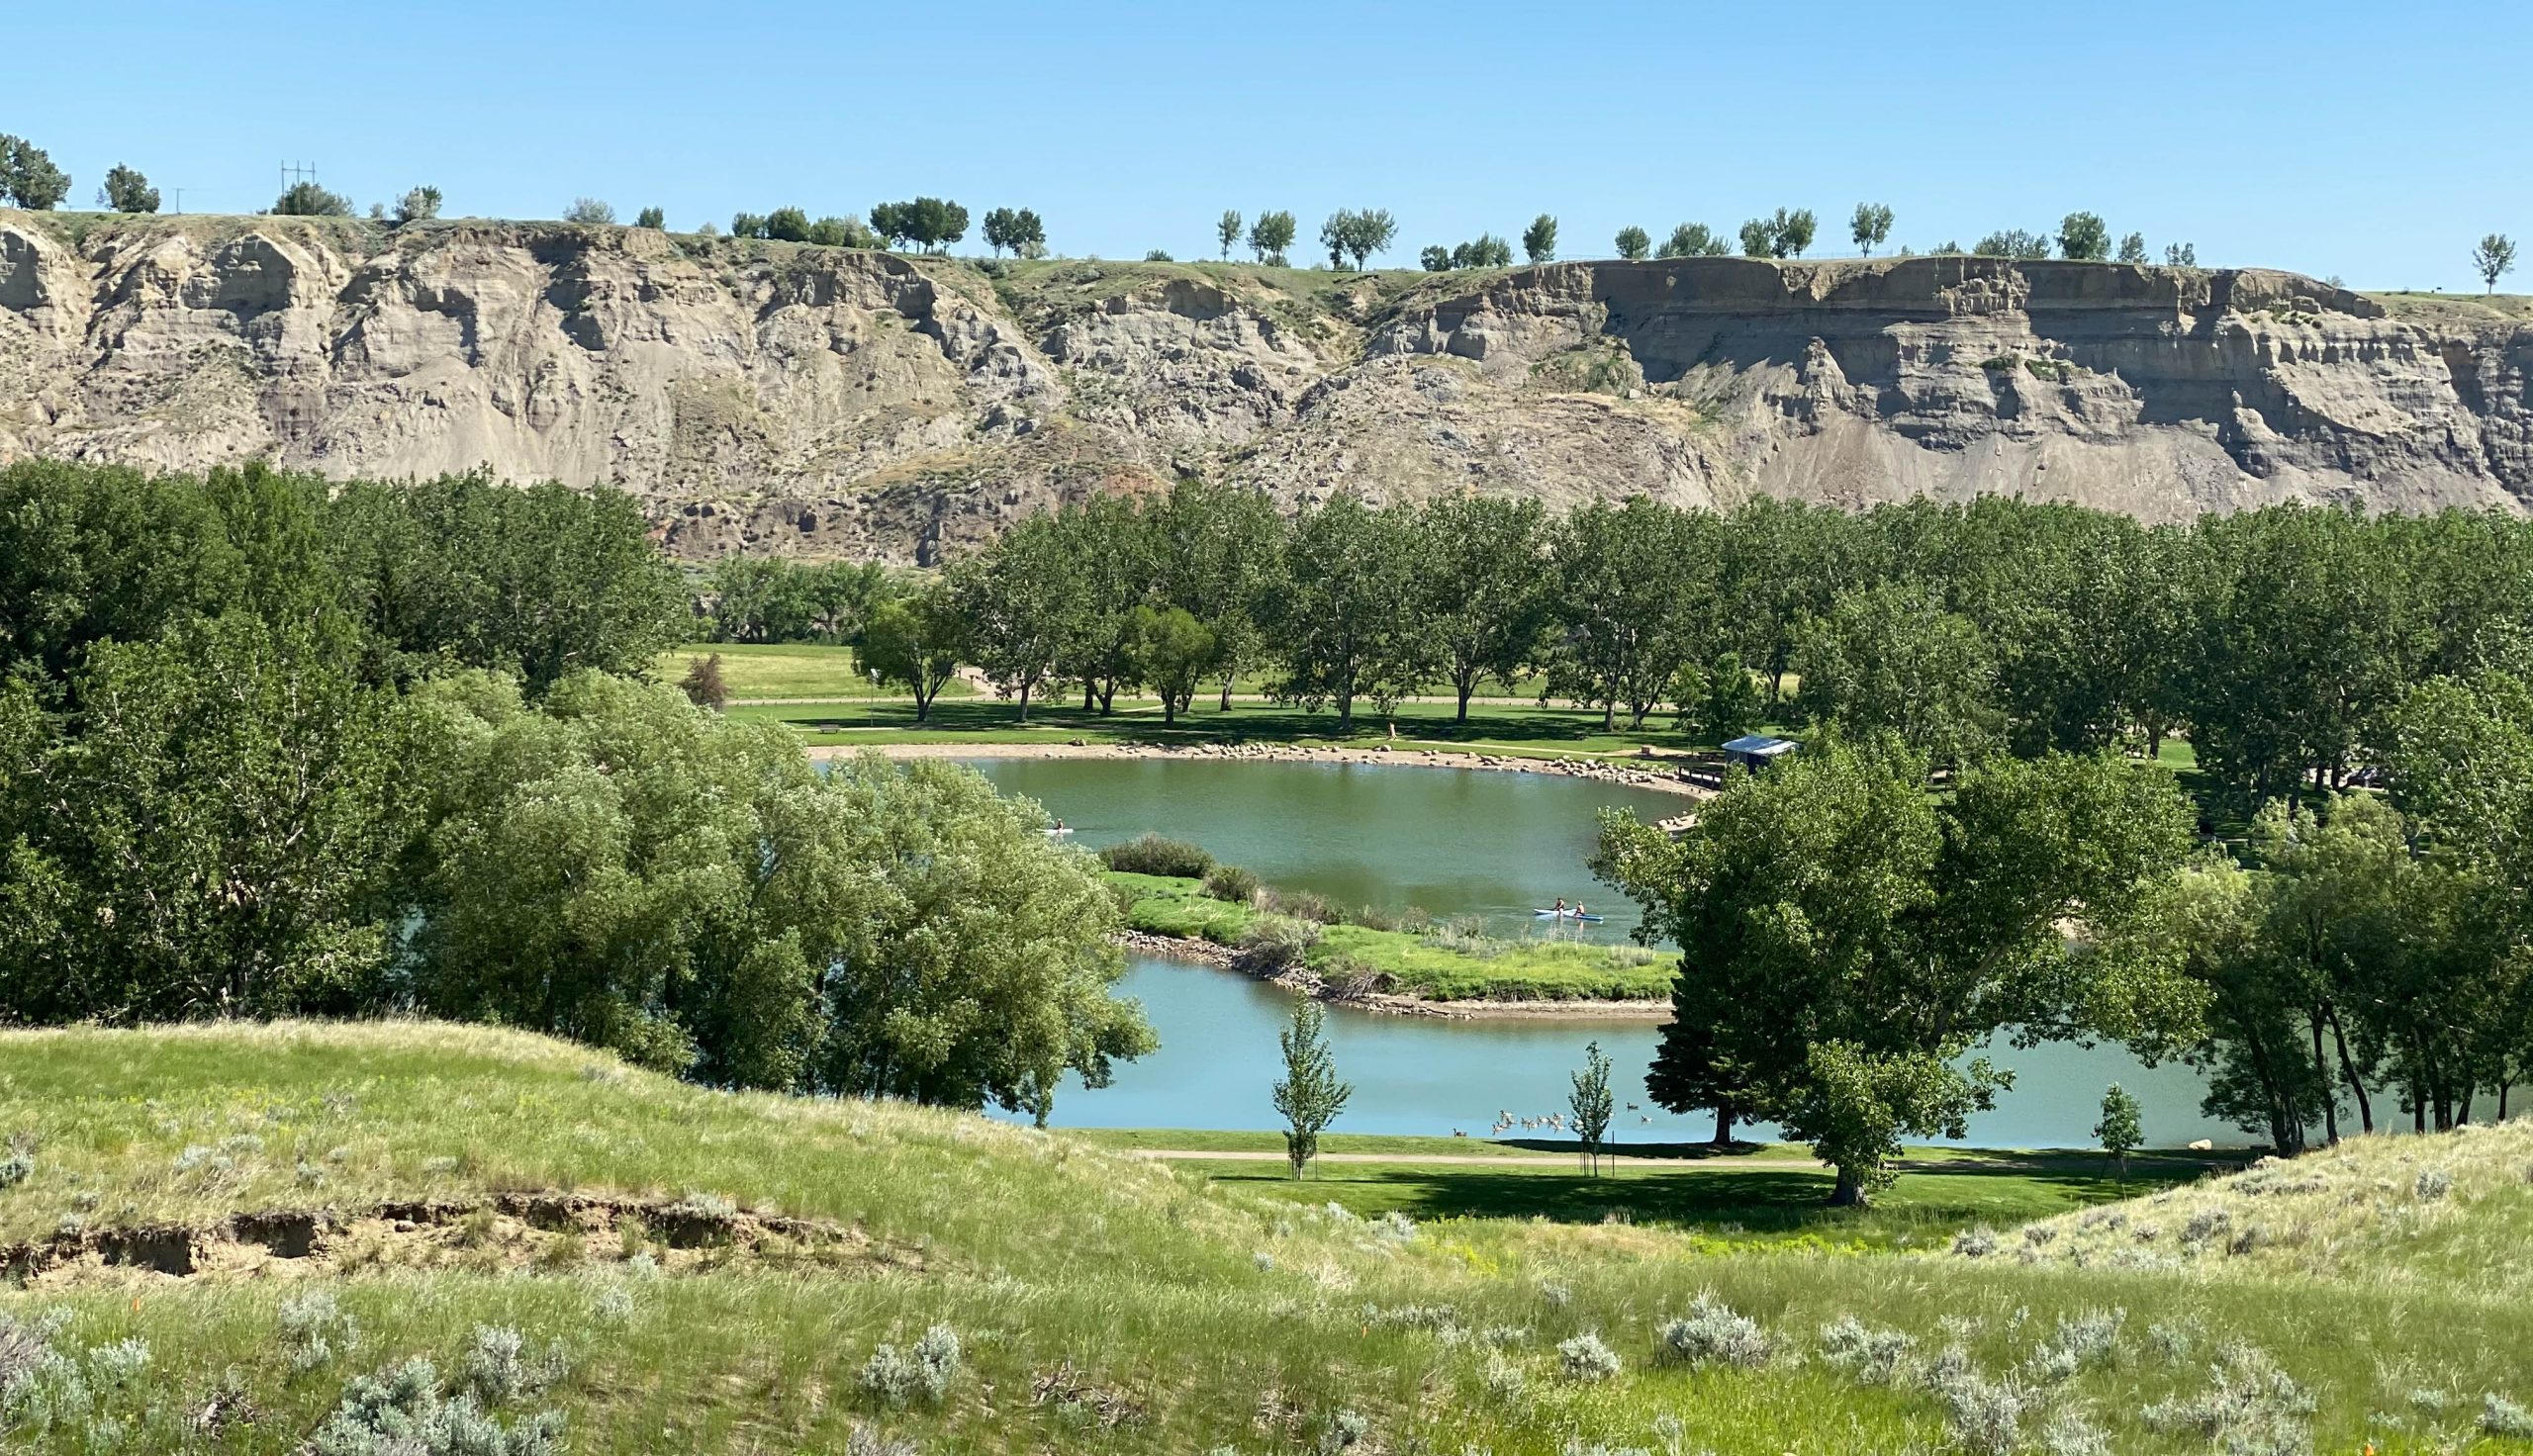 An image of Echo Dale Regional Park paddling Lake and cliffs in summer in Medicine Hat, Alberta, Canada.